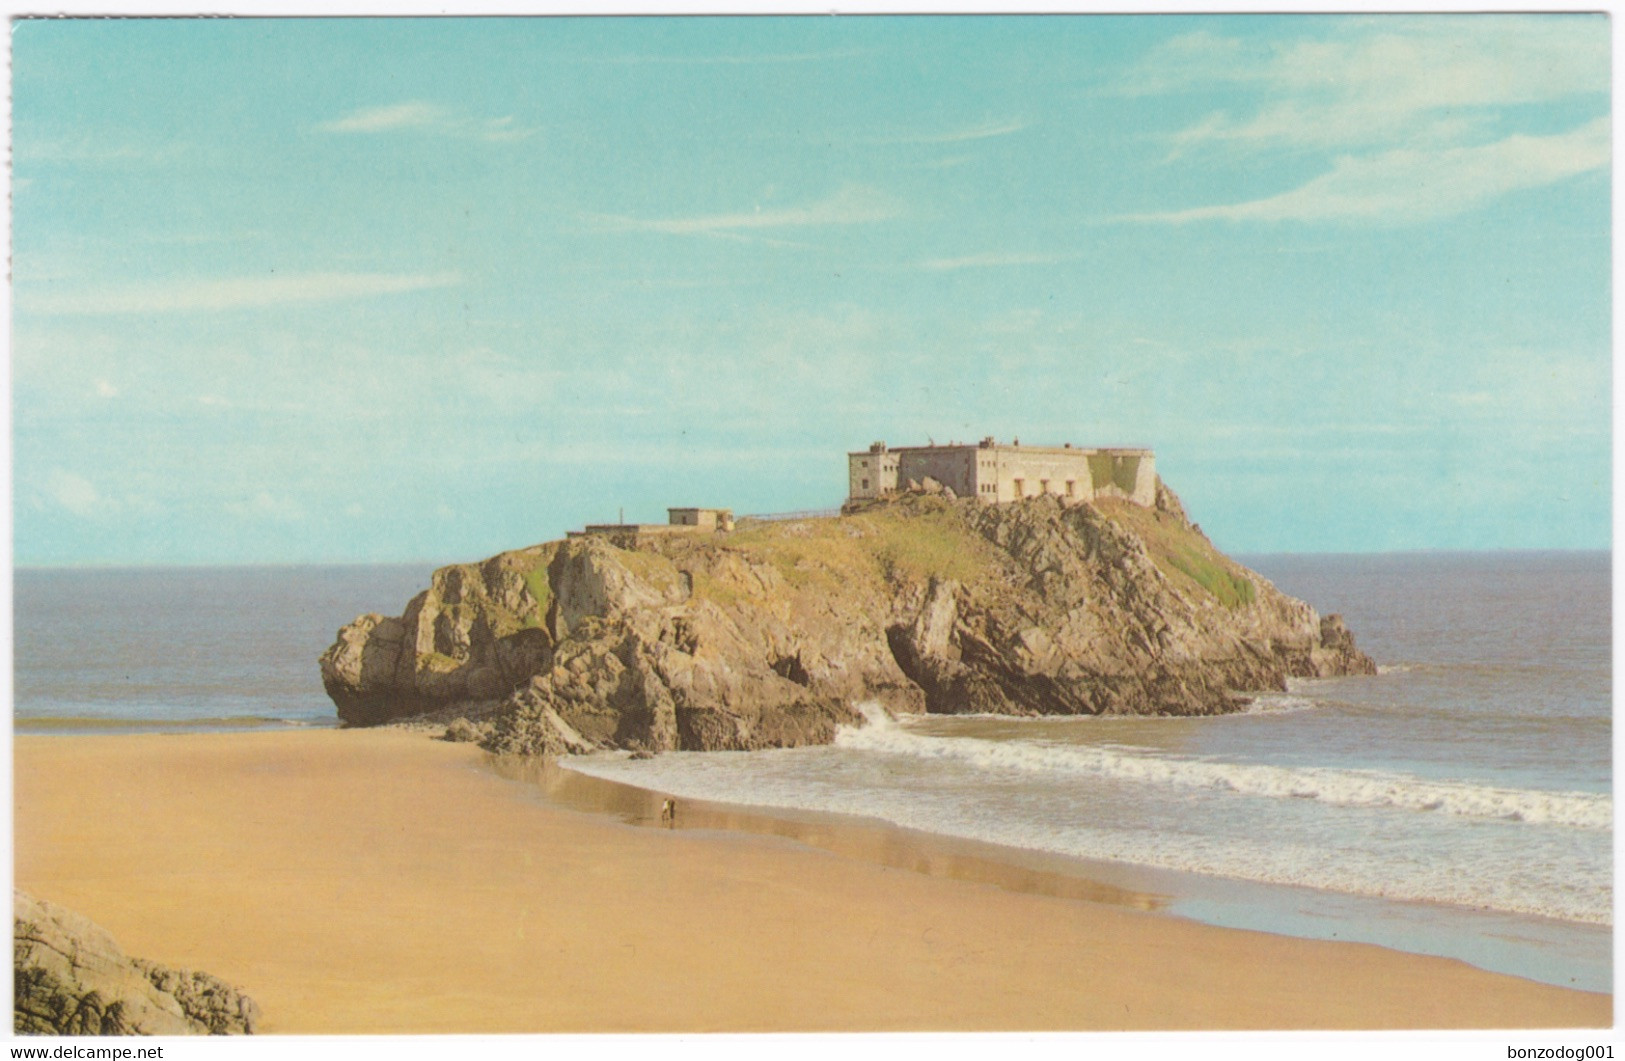 St. Catherine’s Island, Tenby, Wales - Pembrokeshire